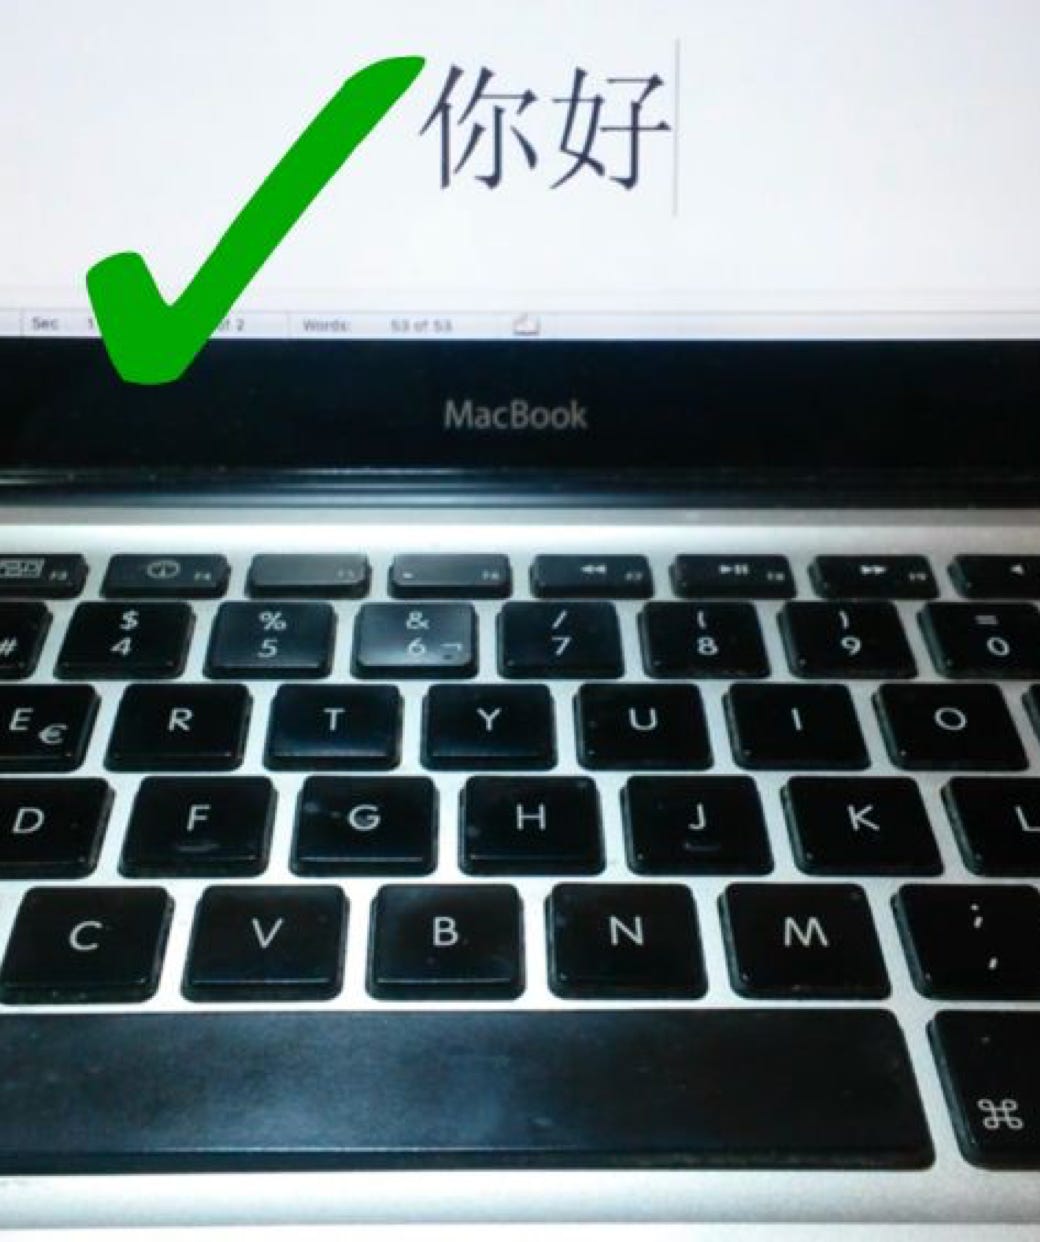 Learn to read and write Chinese characters on your keyboard